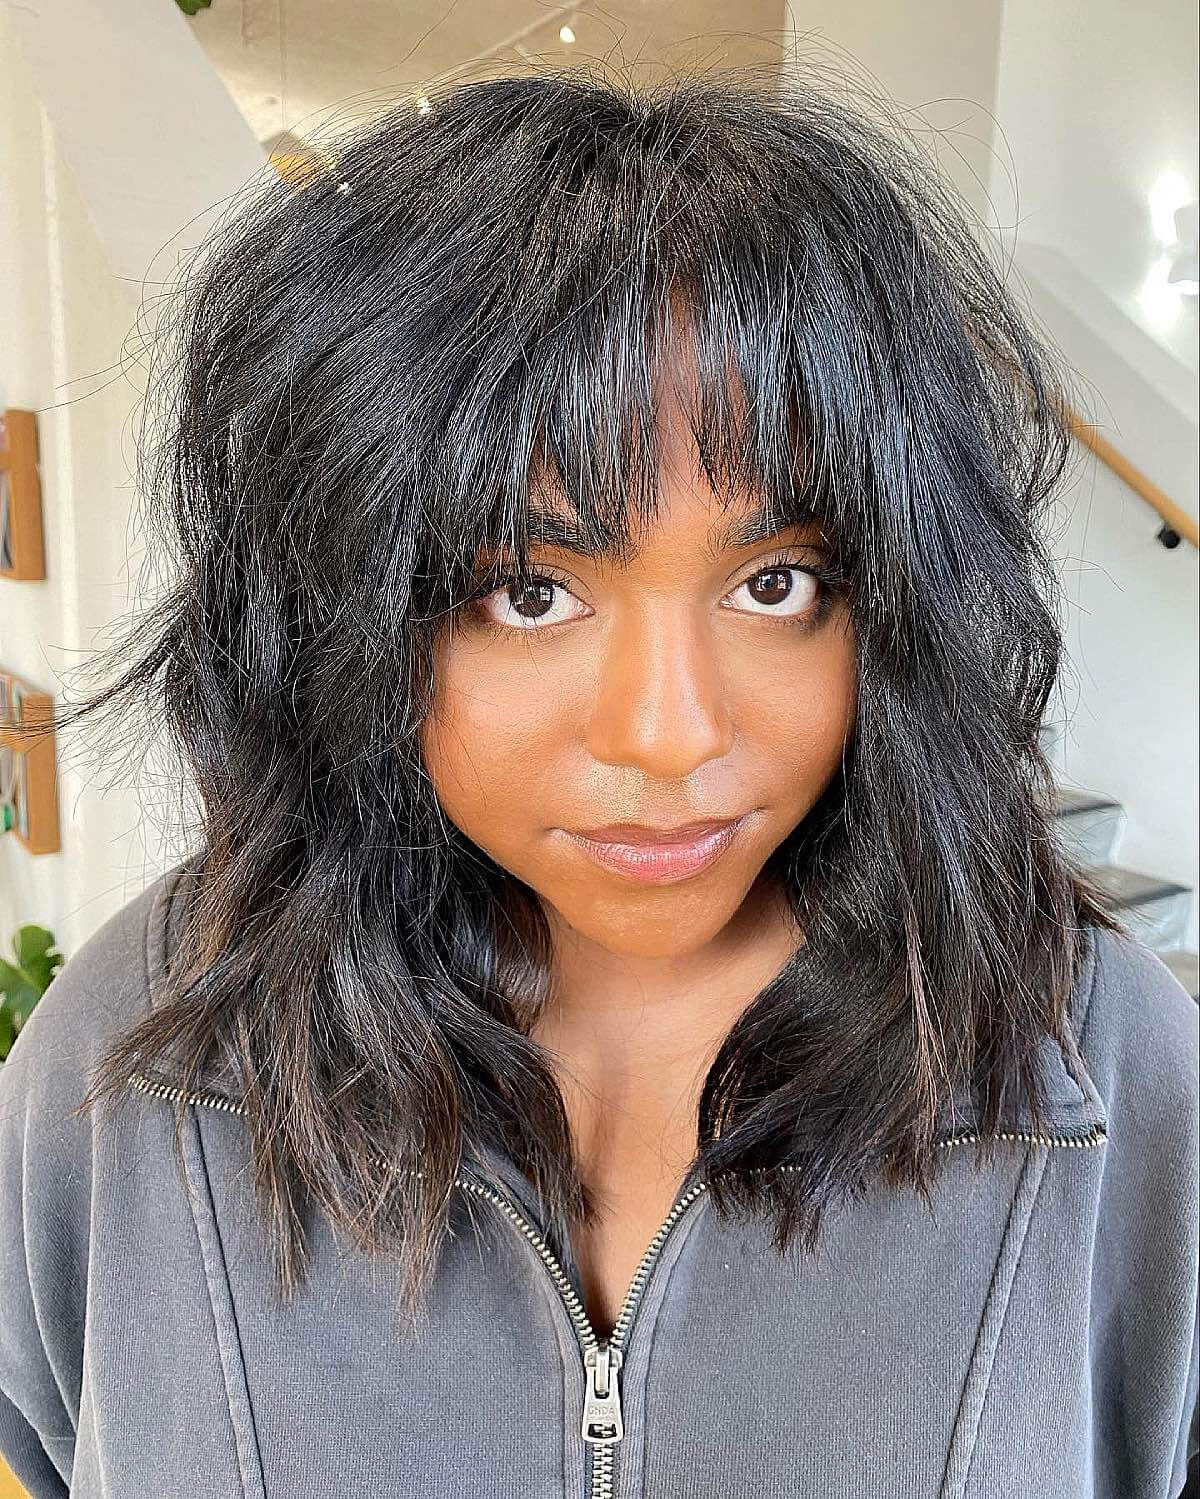 Aggregate 167+ black girl hairstyles with bangs best